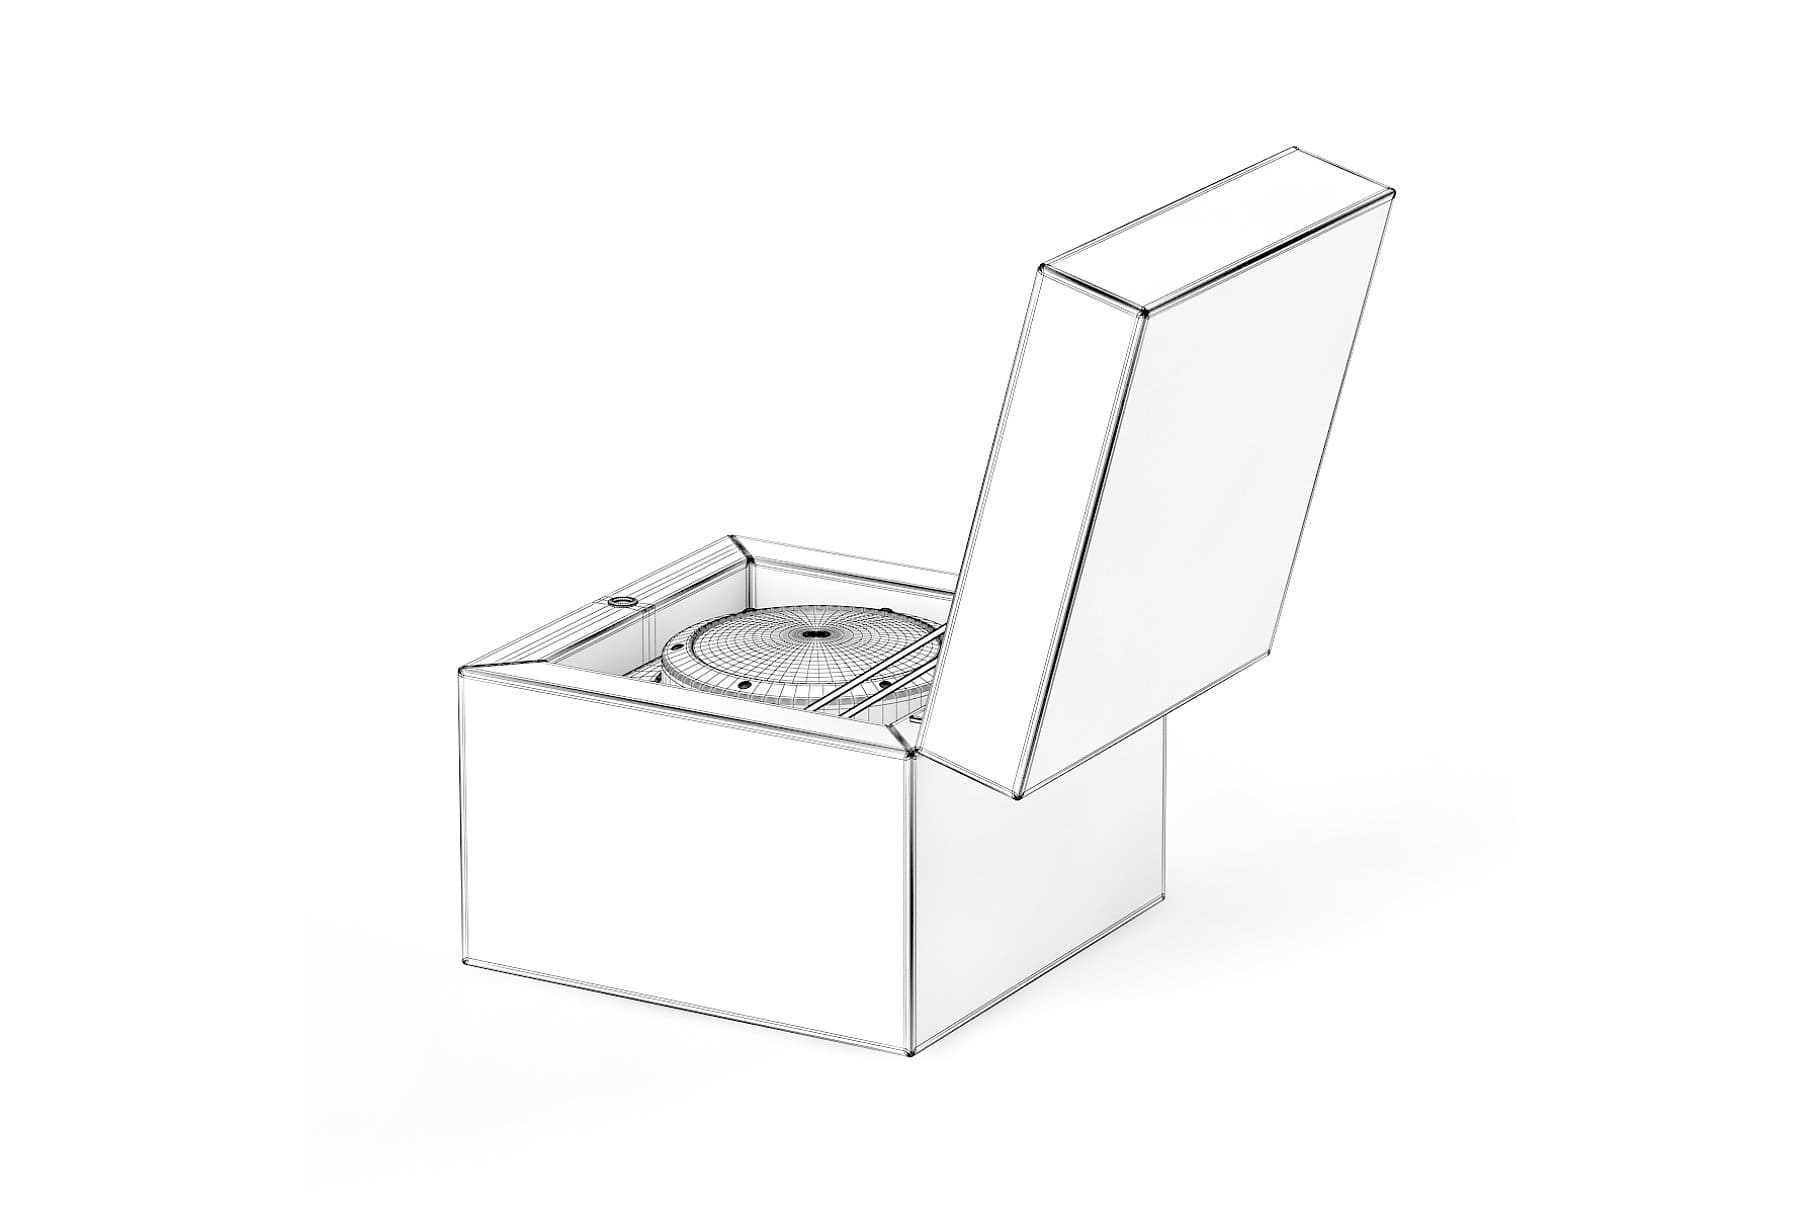 3d model of a clock and a box in white color on a white background.